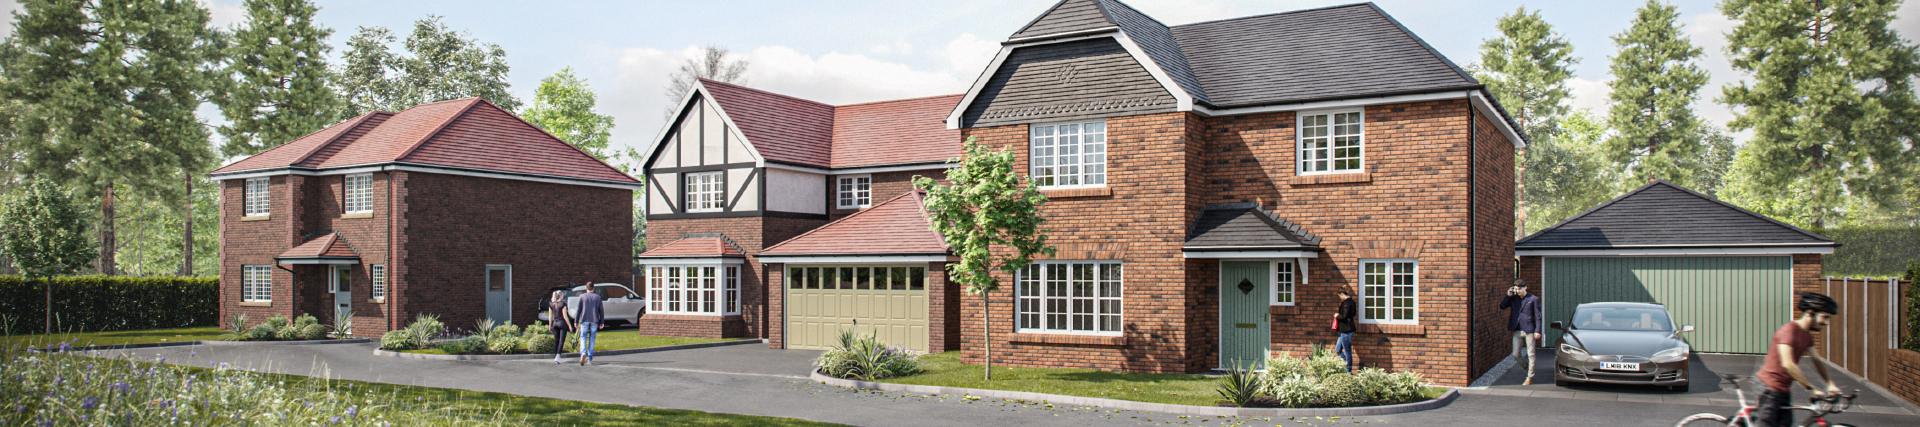 3 & 4 Bedroom New Build Homes, Home